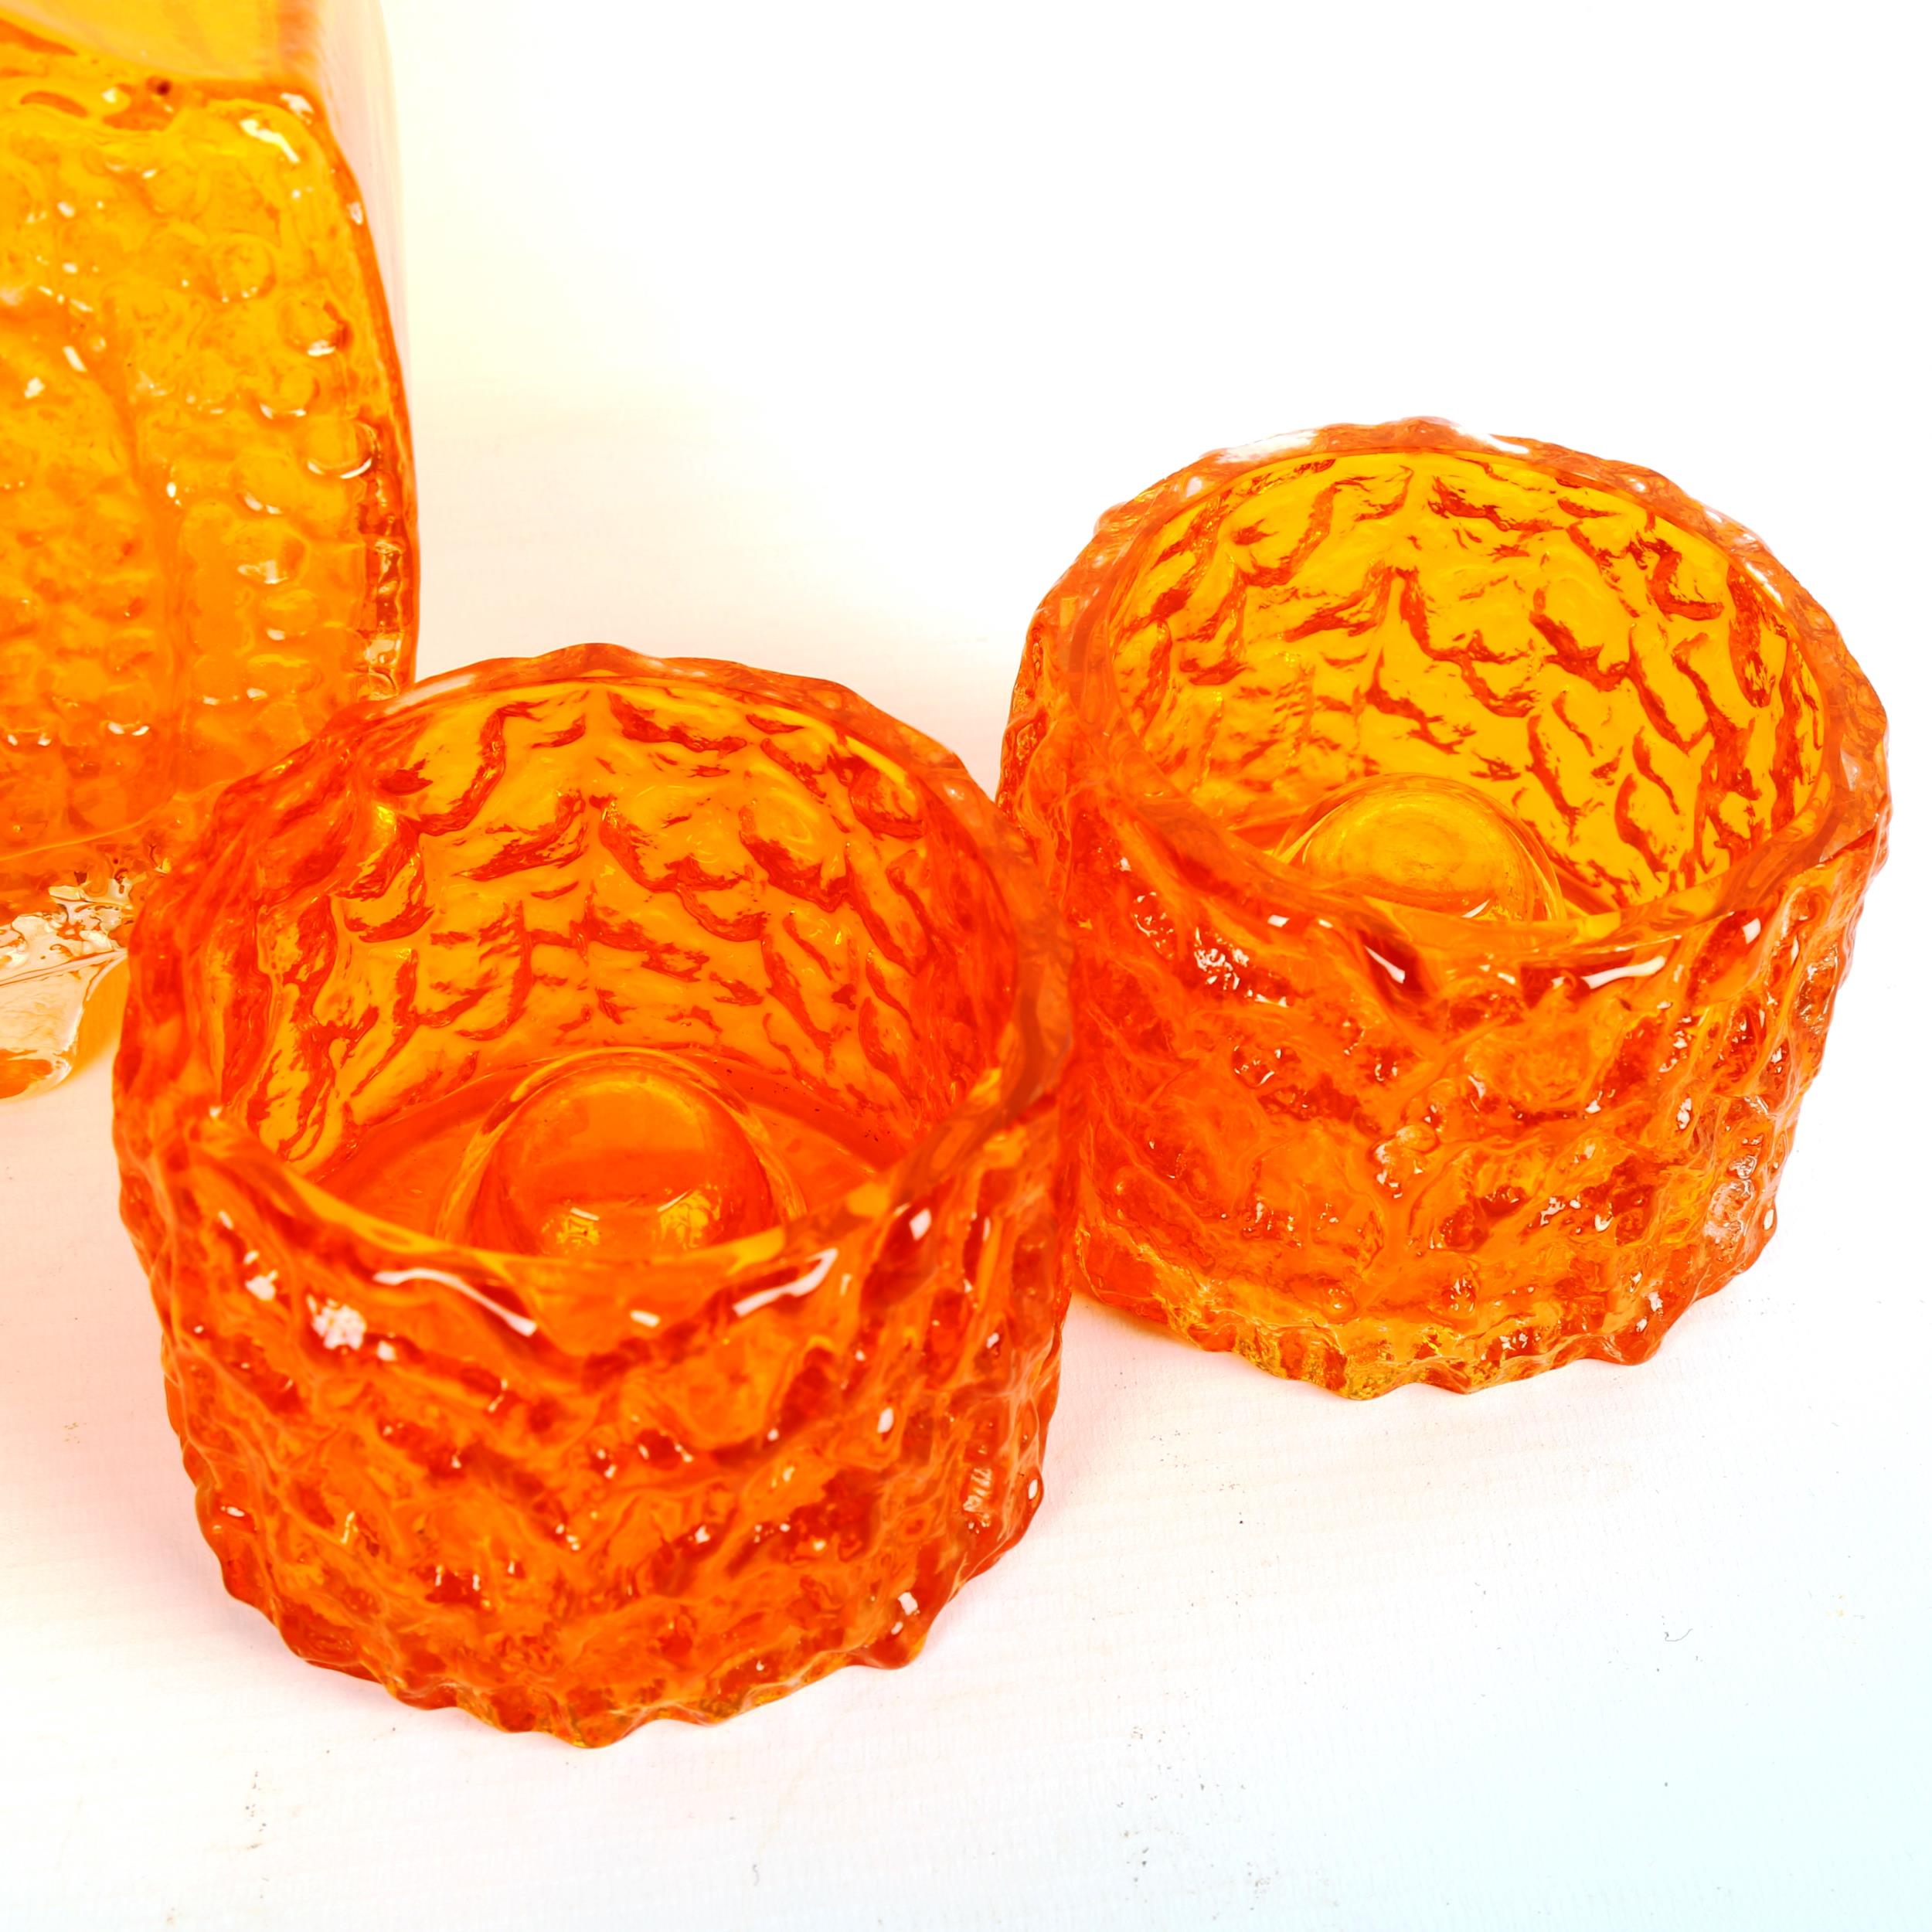 GEOFFREY BAXTER for Whitefriars Glass, a Tangerine TV textured vase and two Tangerine candle - Image 2 of 3